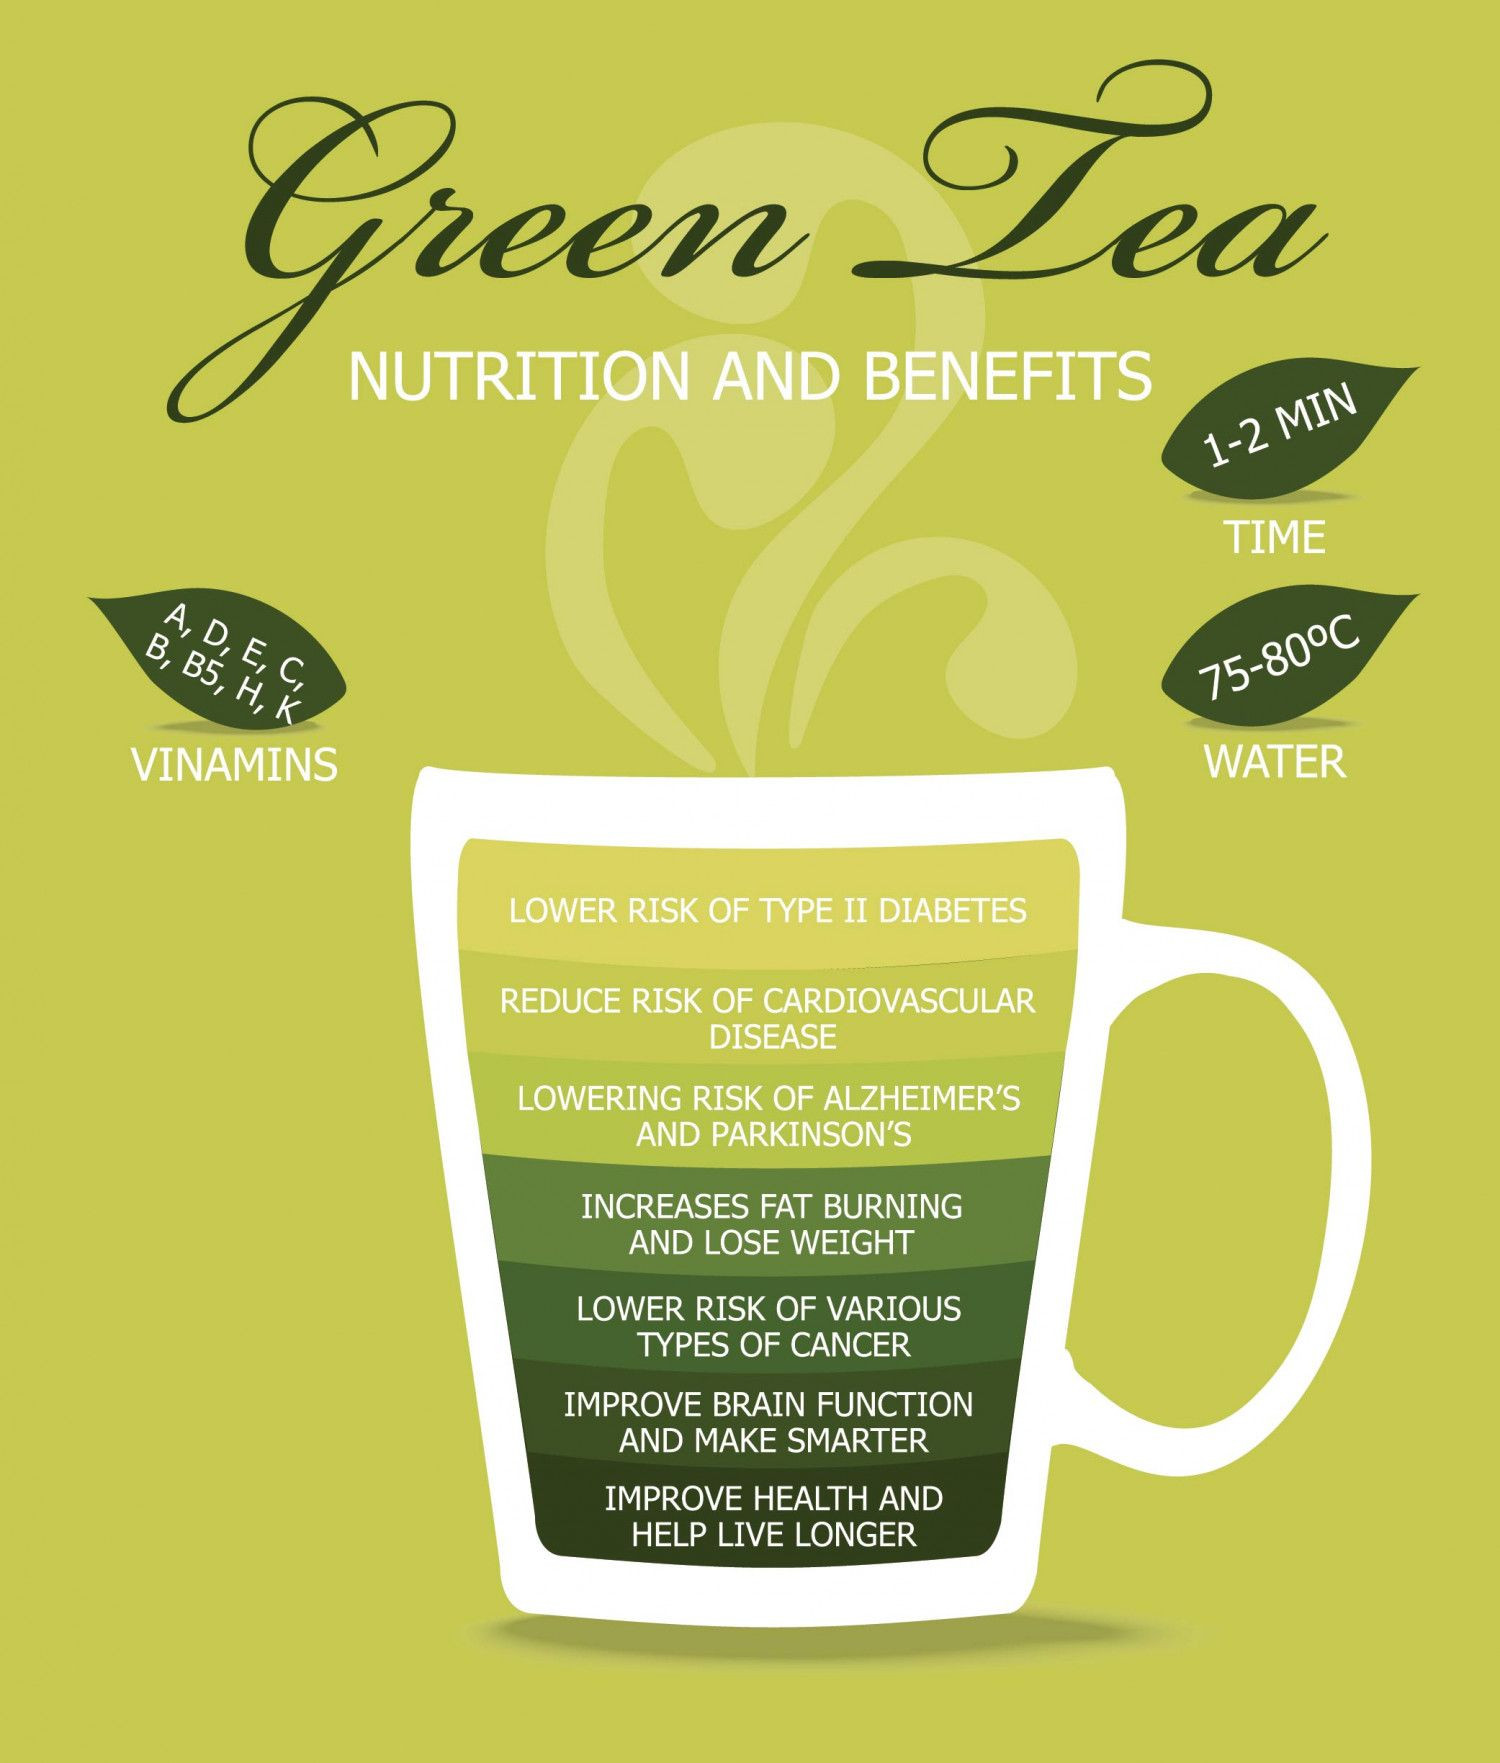 Cold Green Tea Weight Loss
 Just Some Reasons to Drink Green Tea Infographic